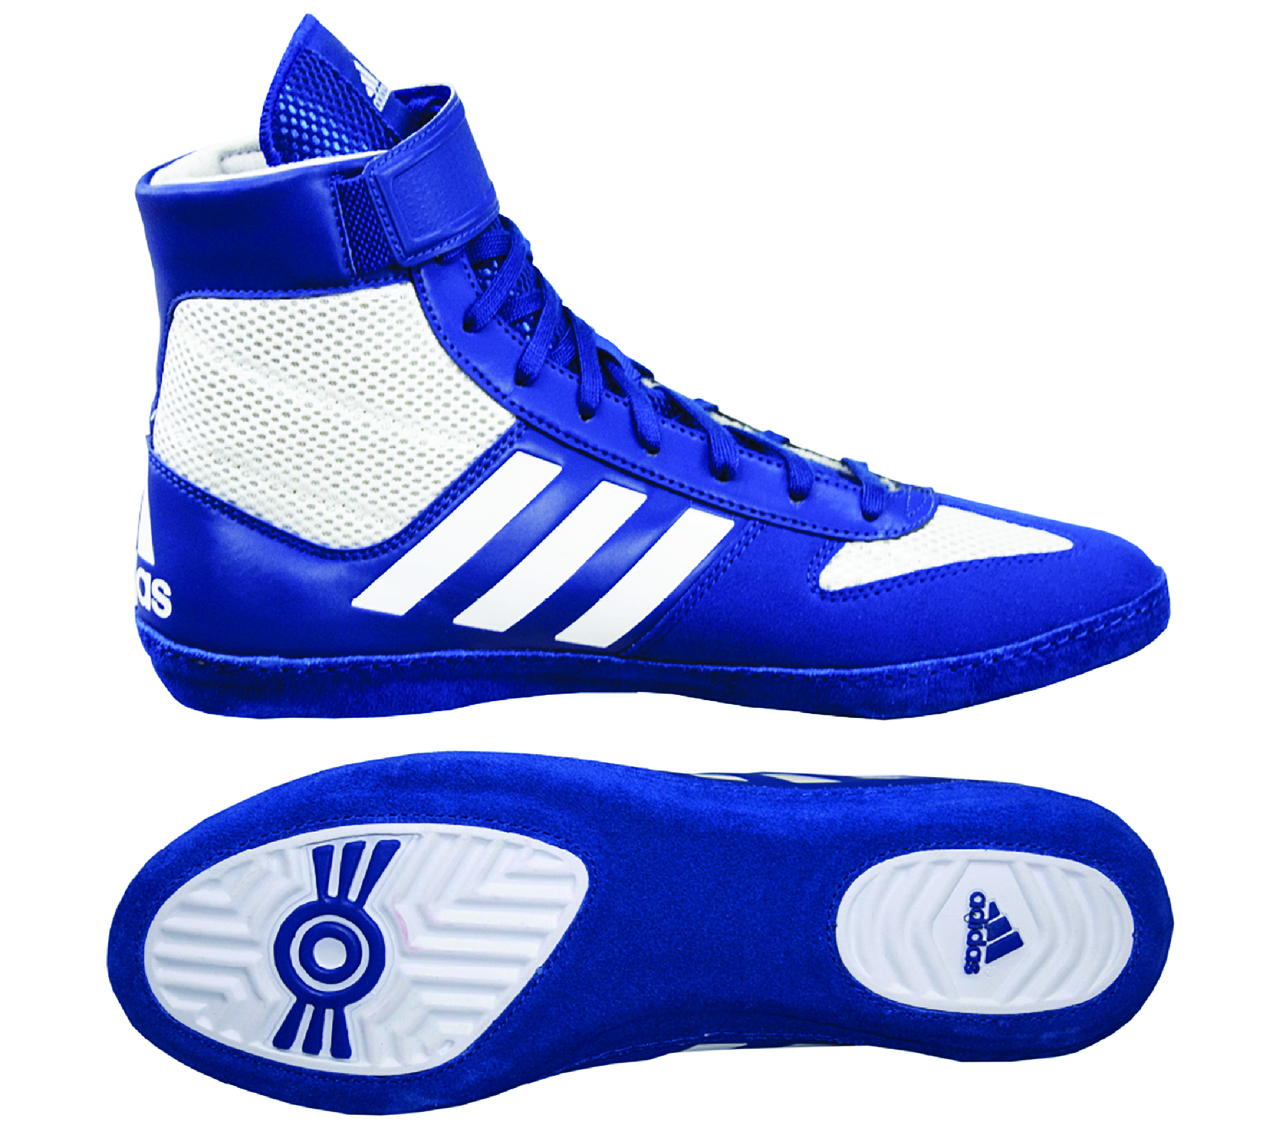 Adidas Combat Speed 5 Wrestling Shoes, color: Royal/White